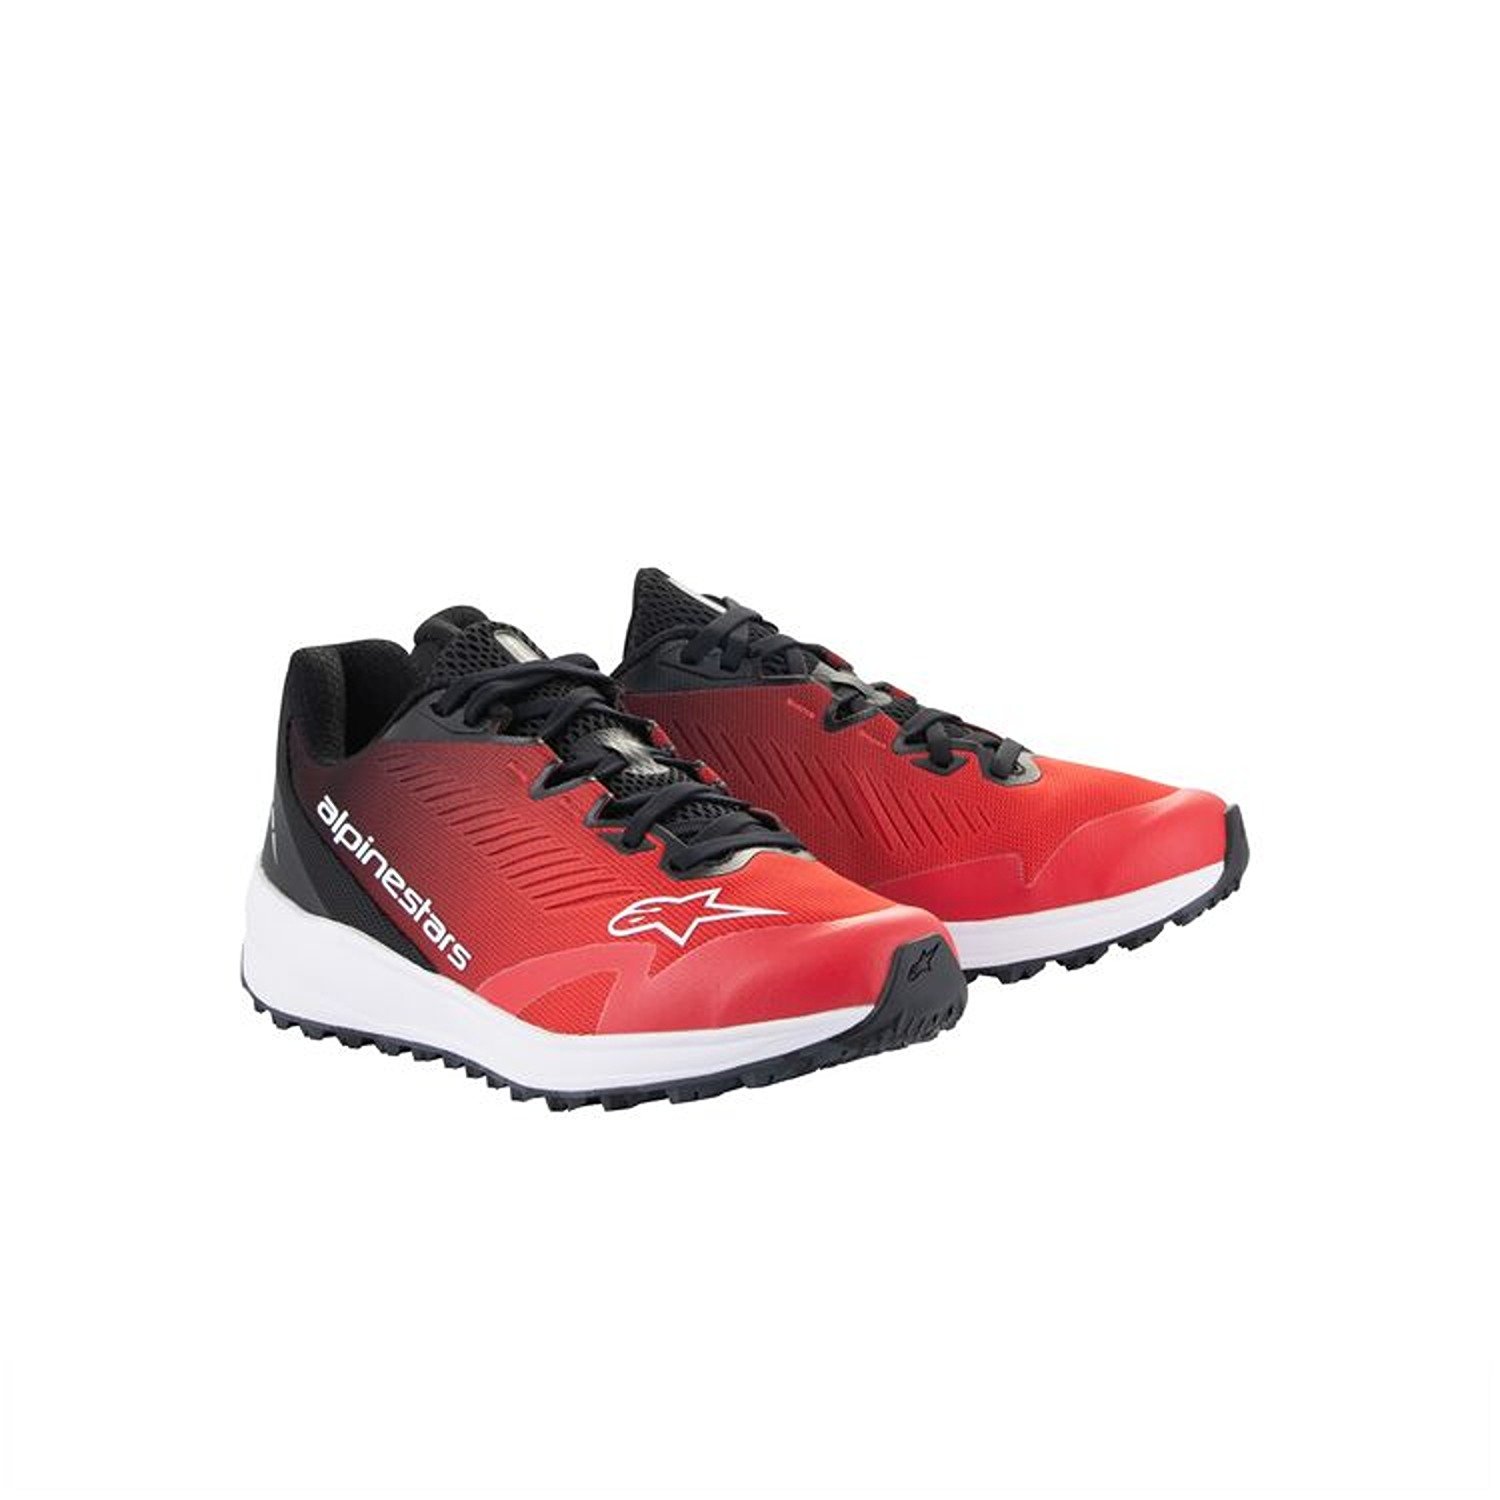 Image of Alpinestars Meta Road V2 Shoes Red Black White Taille US 95